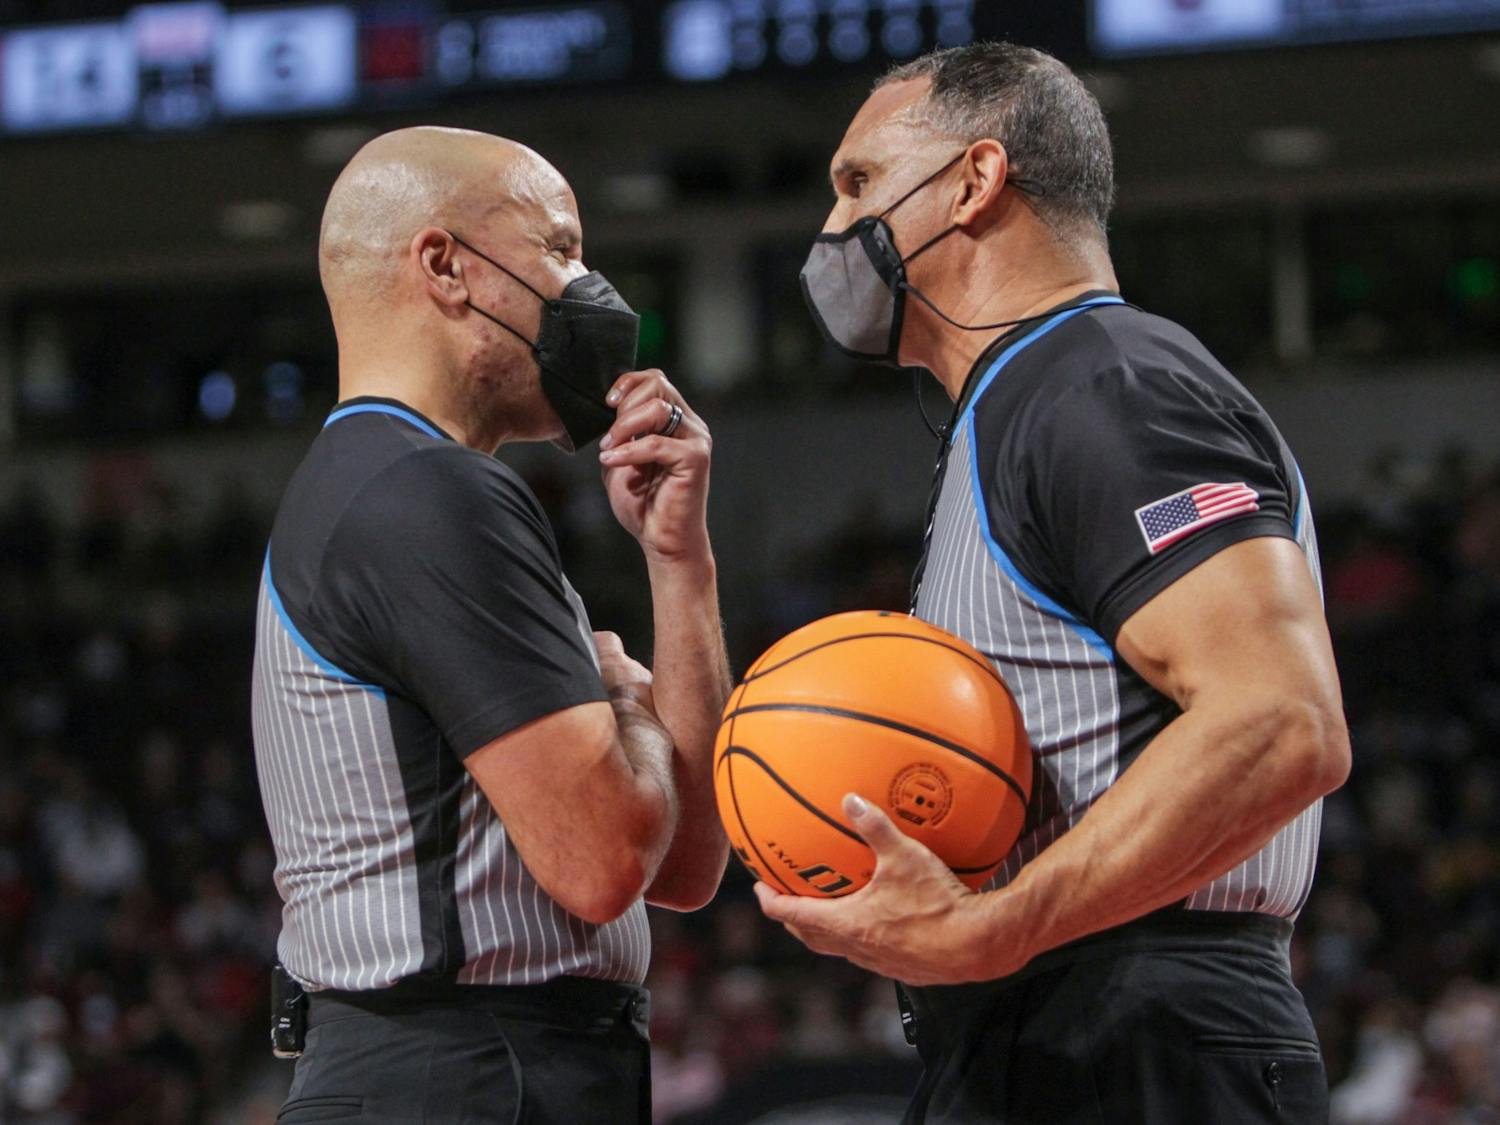 Two officials discuss a call during a game on Feb. 17, 2022 at Colonial Life Arena in Columbia, SC. The Gamecocks beat Auburn 75-38.